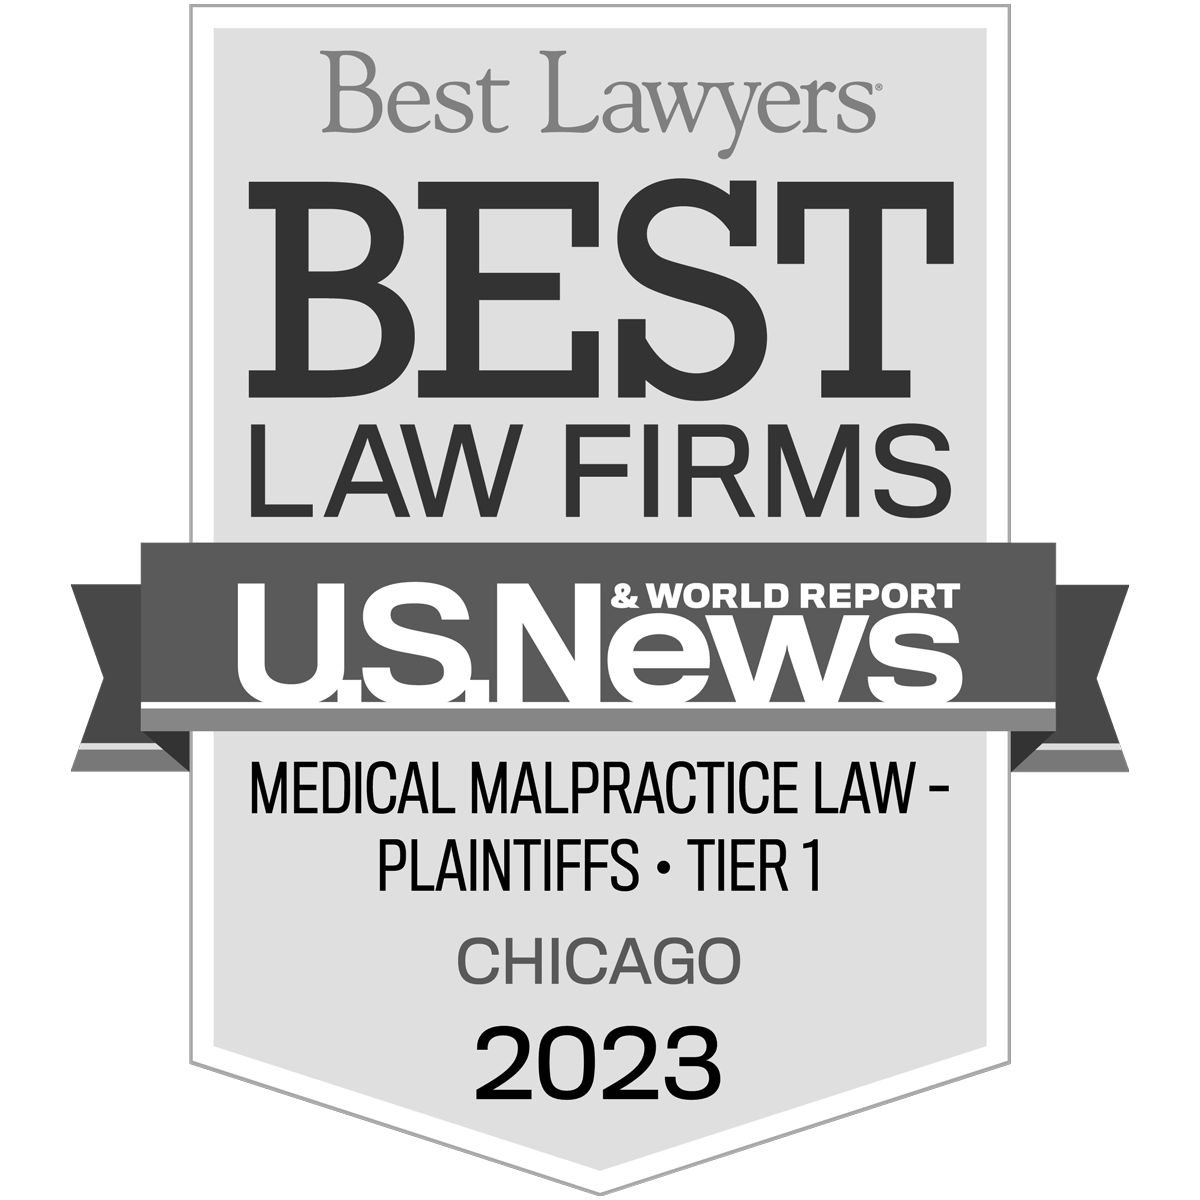 Best Lawyers - Chicago